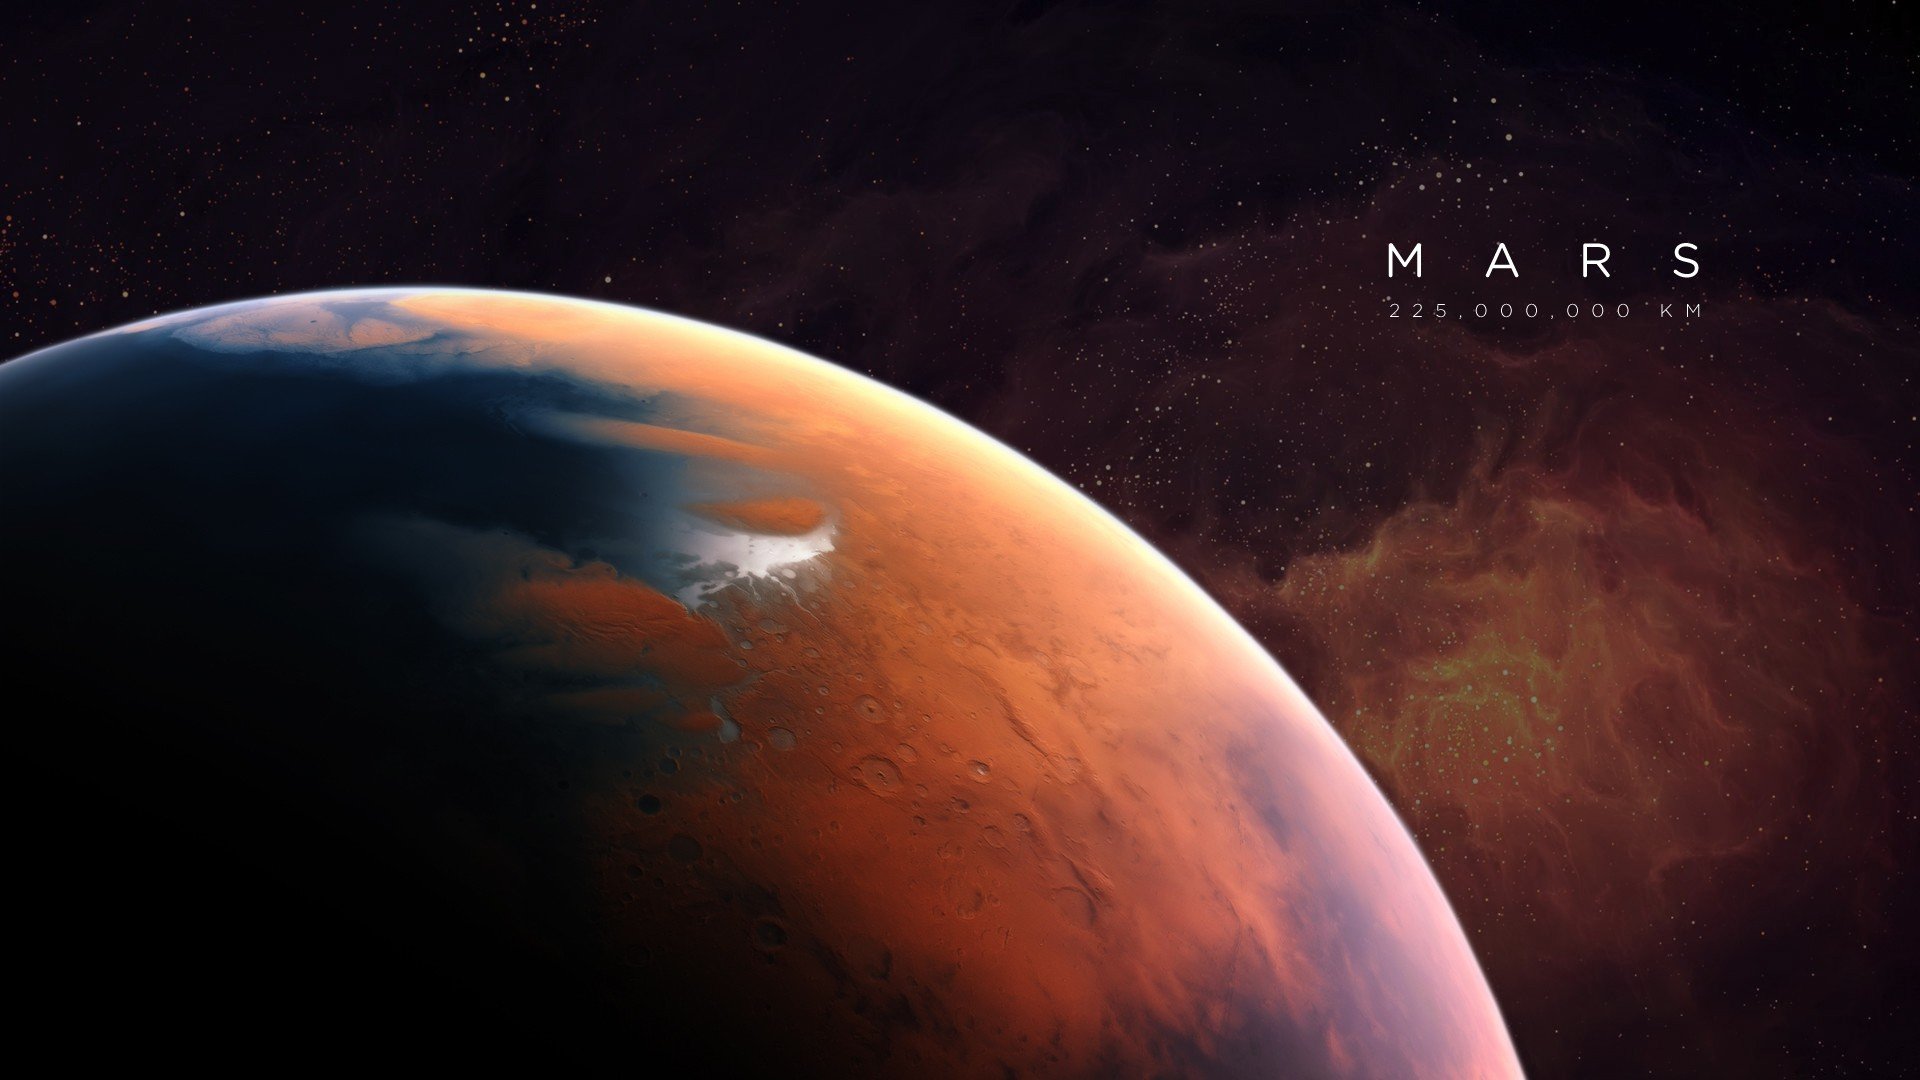 Can Someone Find This 169  R  Xiaomi  Planets  Mars  Cool Mars HD  phone wallpaper  Pxfuel